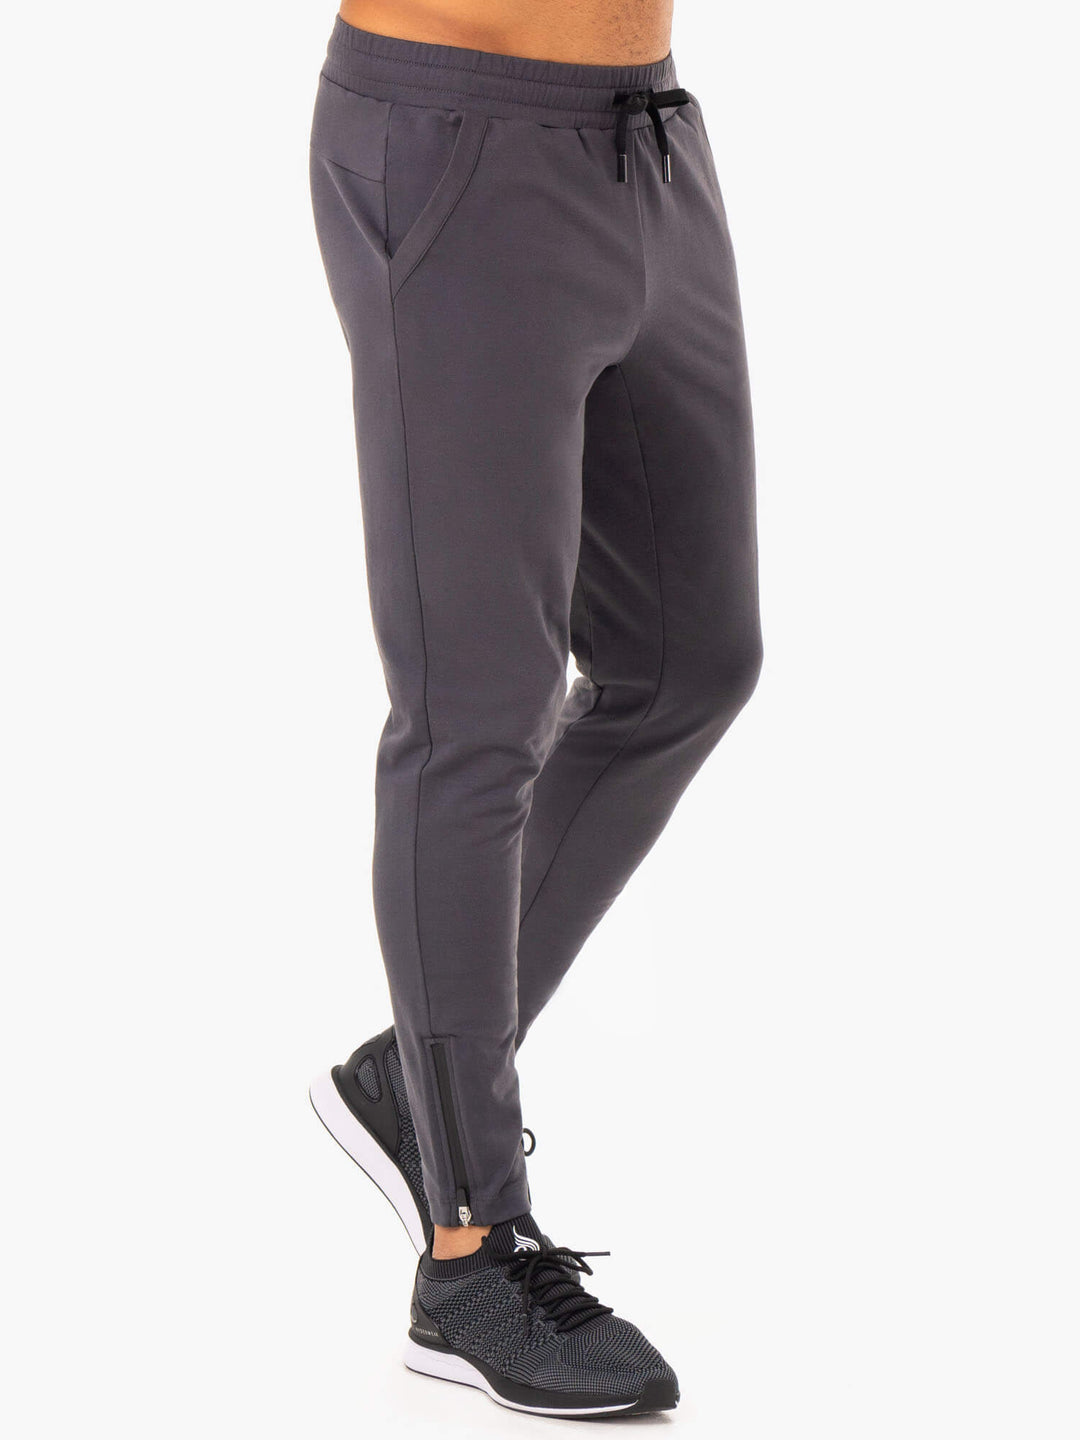 Optimal Gym Track Pant - Charcoal Clothing Ryderwear 